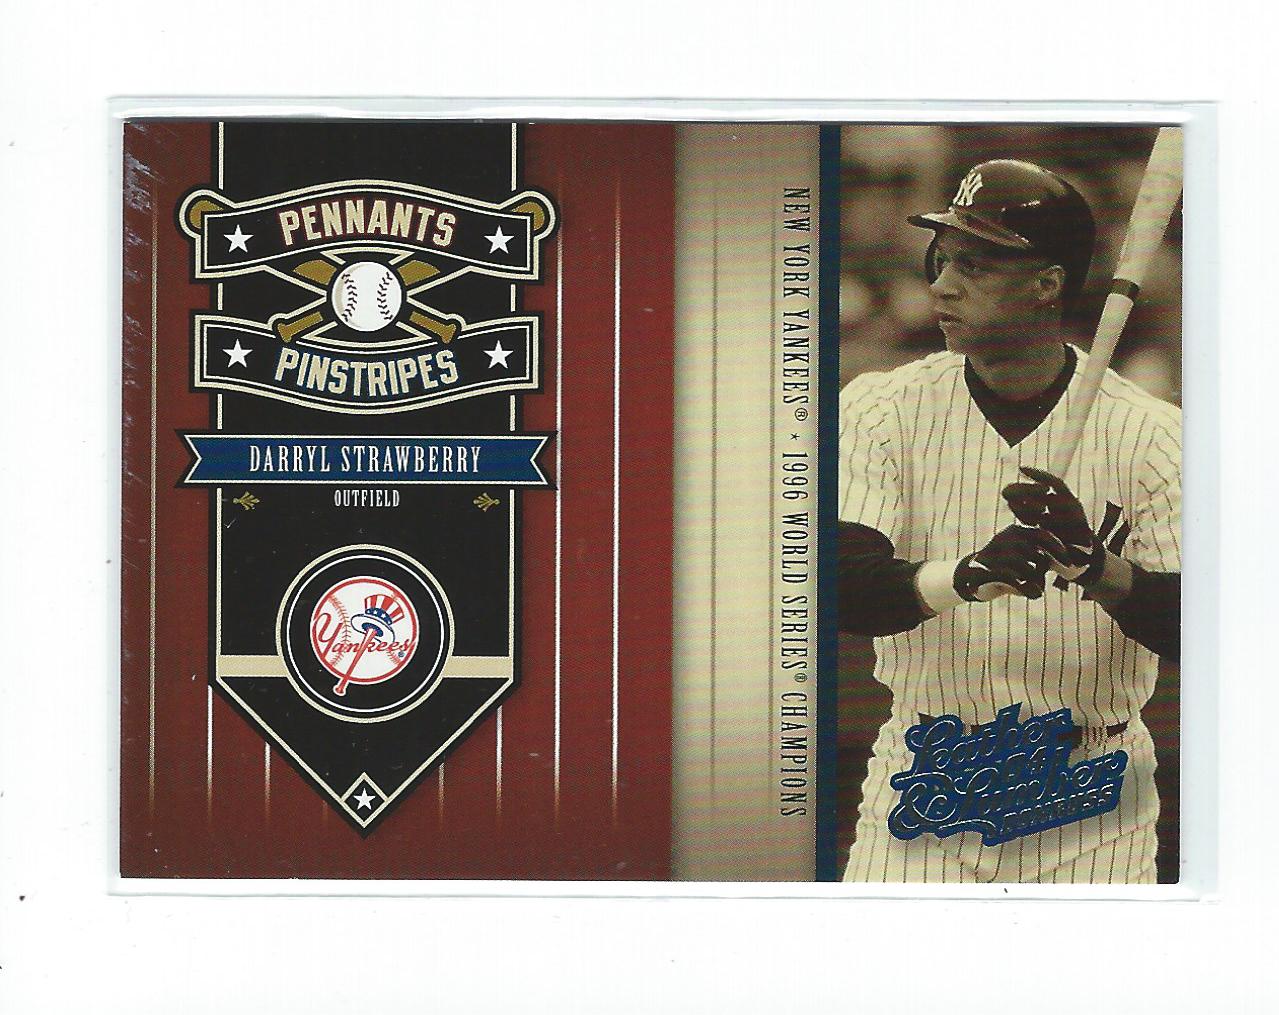 2004 Leather and Lumber Pennants/Pinstripes #5 Darryl Strawberry